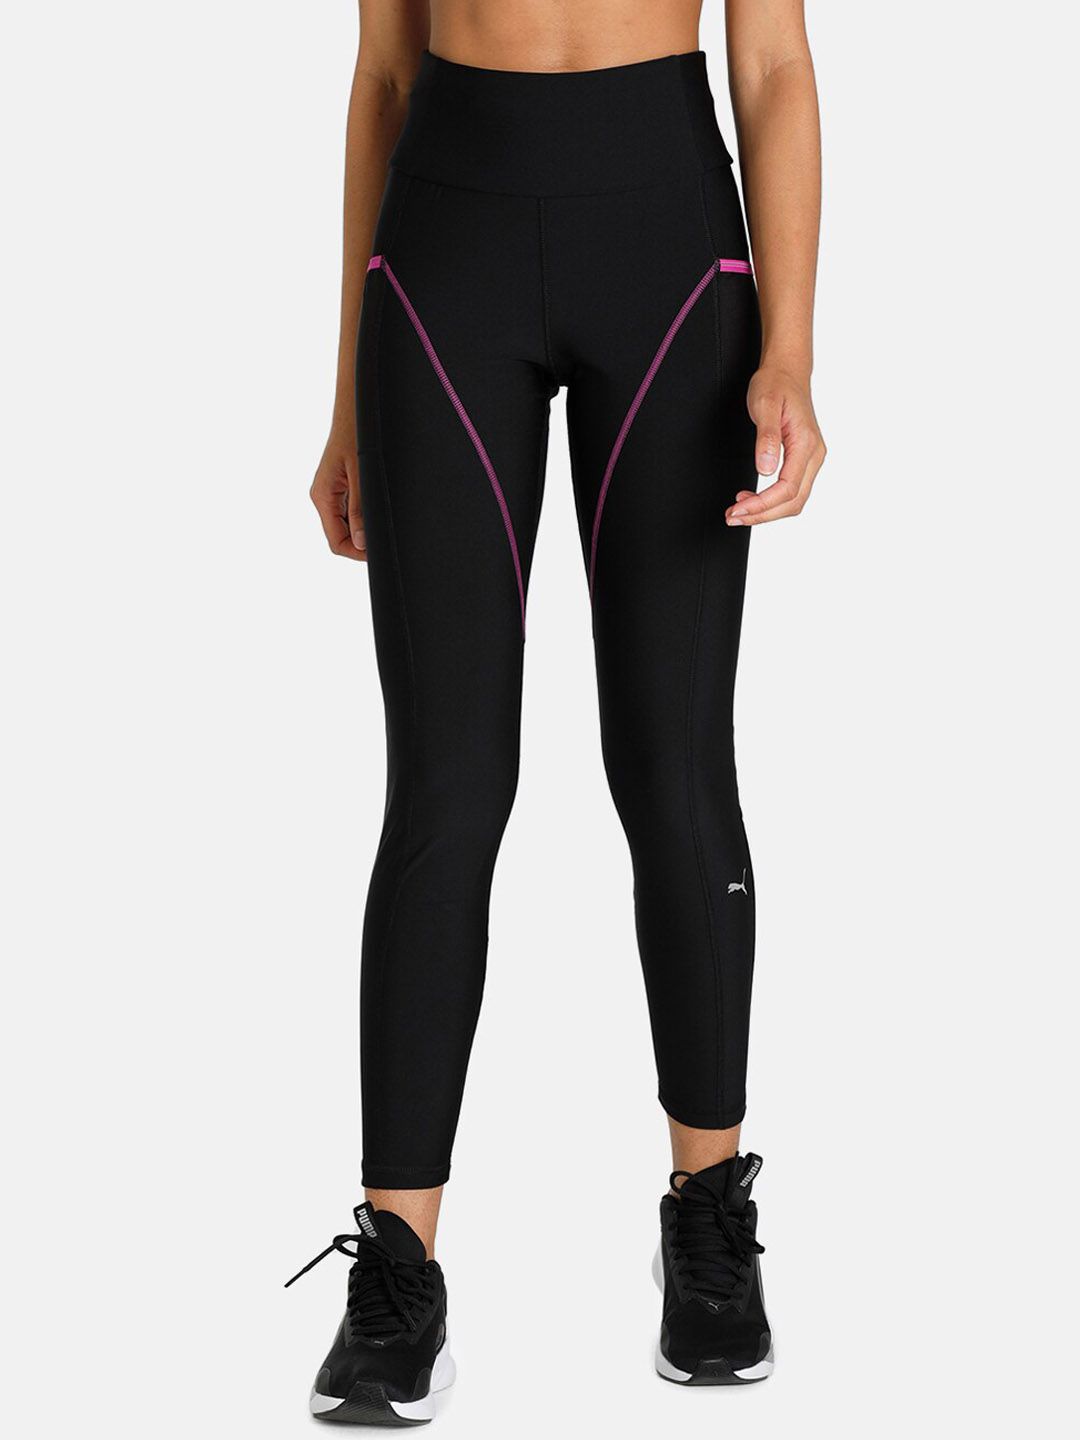 Puma Women Black Solid Slim-Fit Ankle-Length Tights Price in India